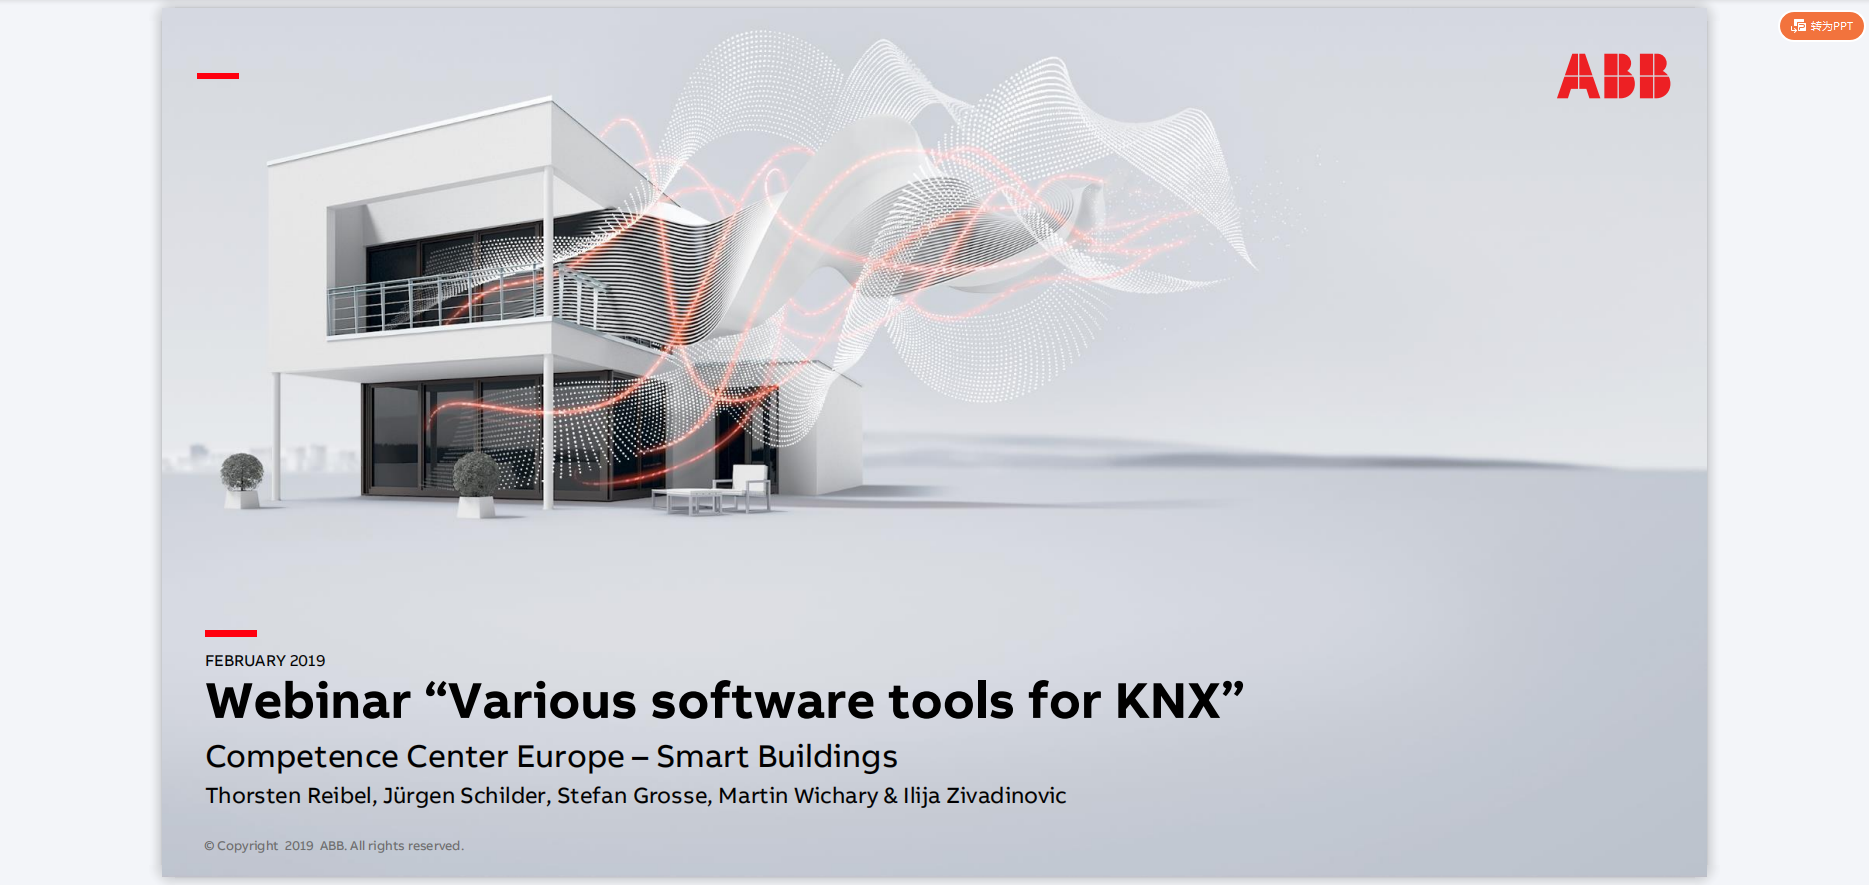 Webinar “Various software tools for KNX”